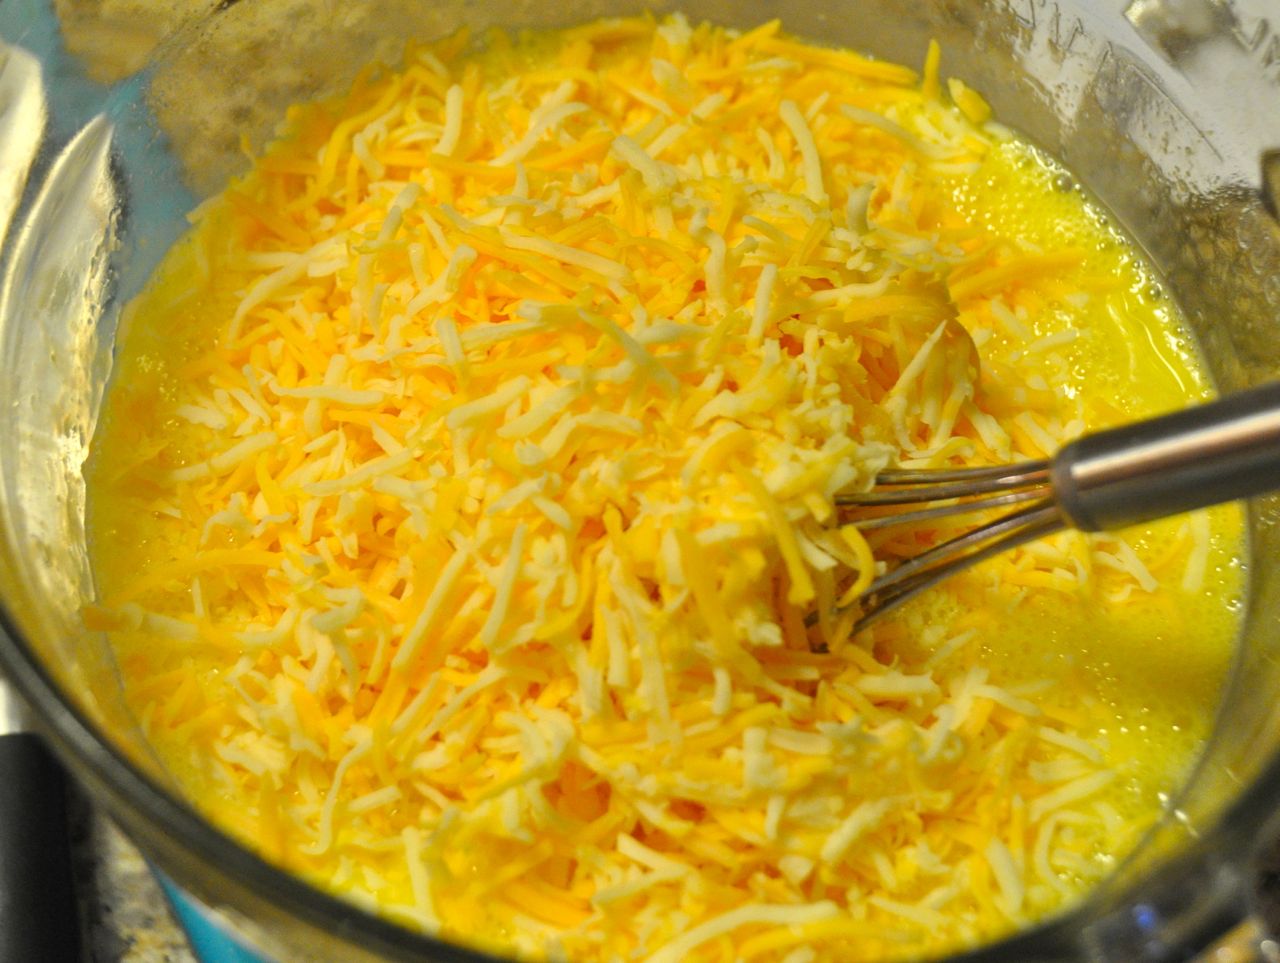 cheese combined to egg mixture